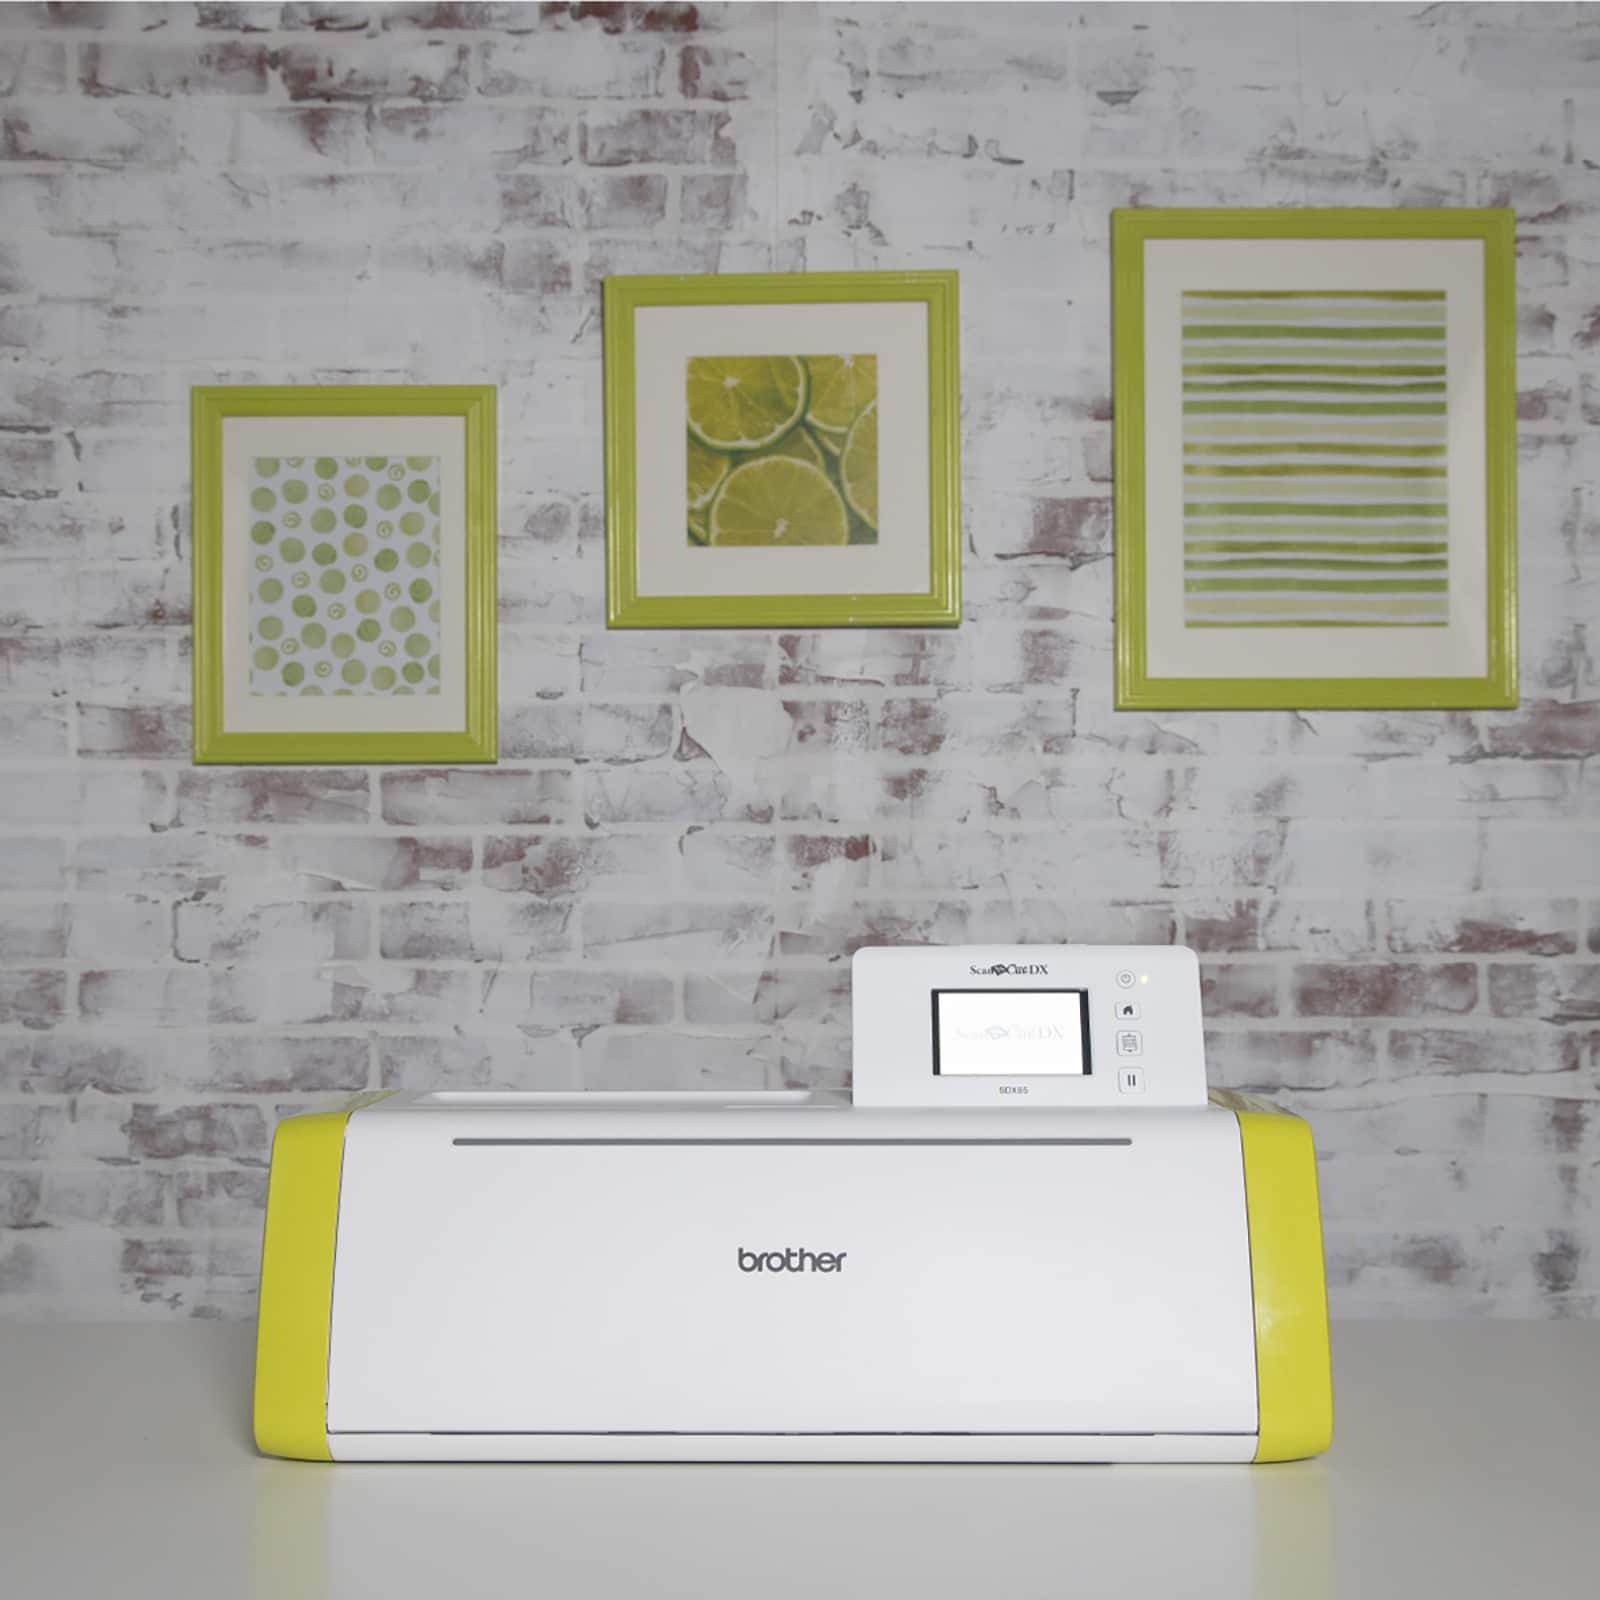 Brother ScanNCut SDX85 in Lime Green